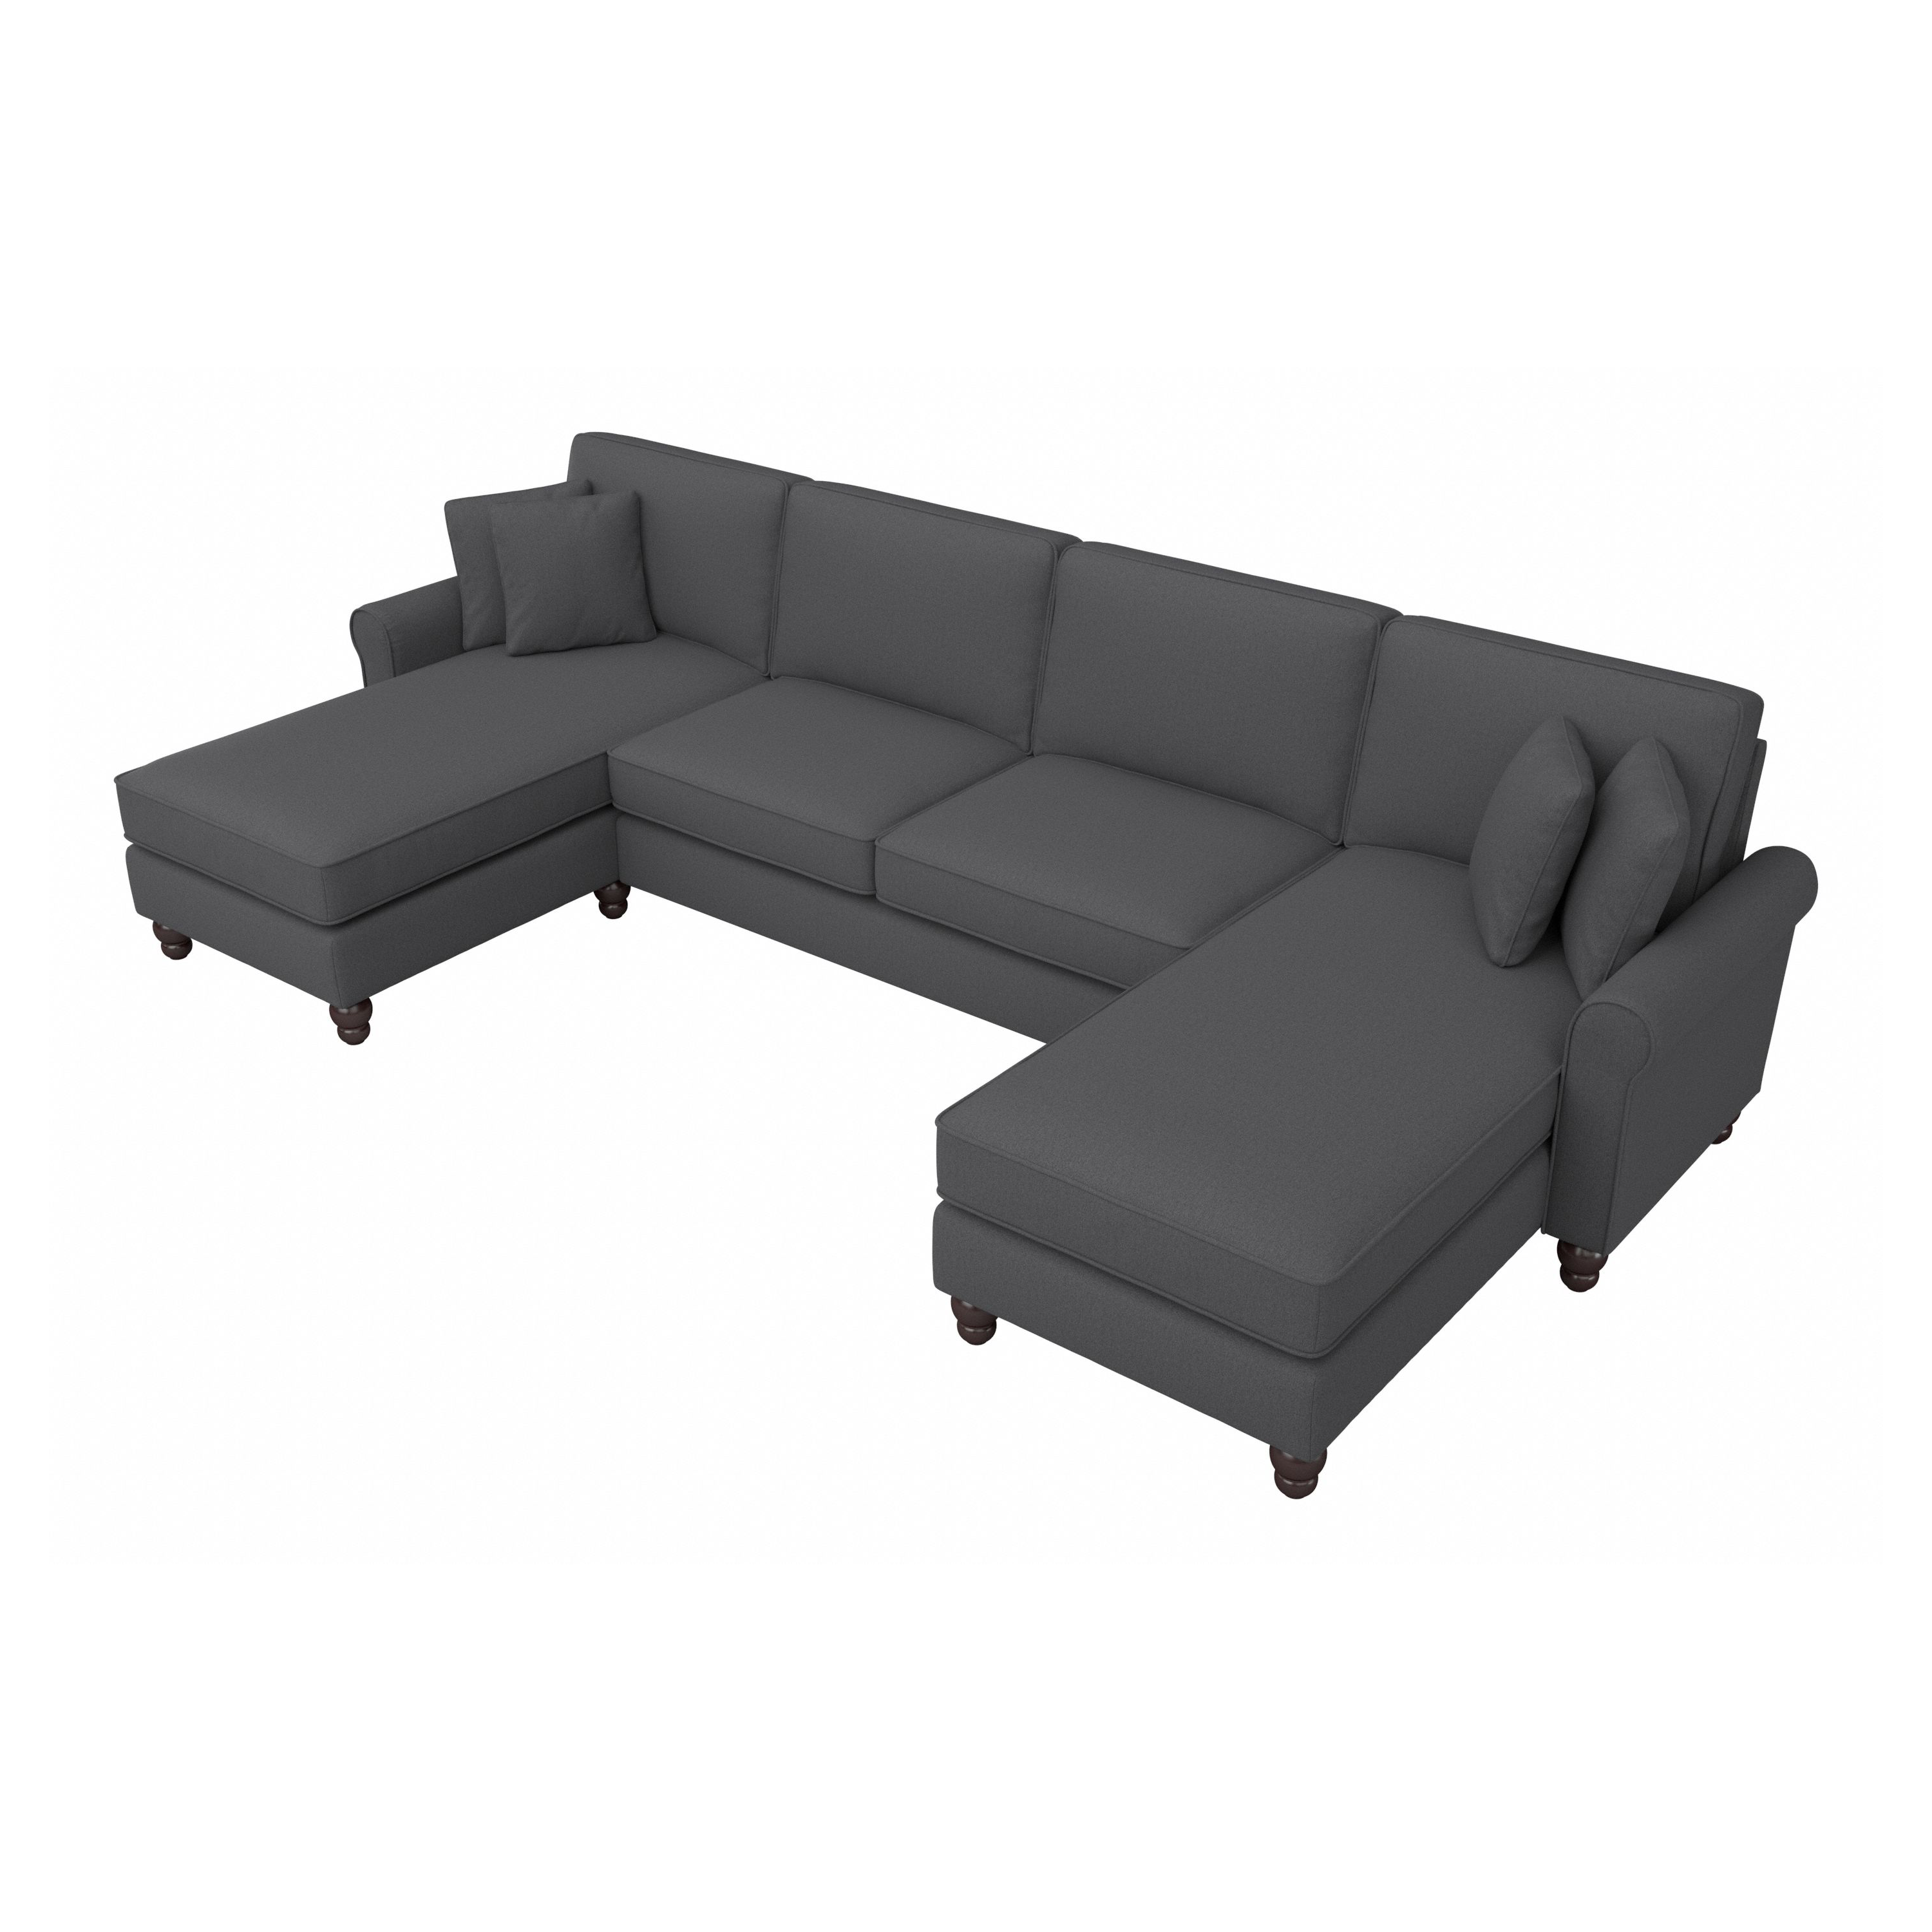 Shop Bush Furniture Hudson 131W Sectional Couch with Double Chaise Lounge 02 HDY130BCGH-03K #color_charcoal gray herringbone fabr